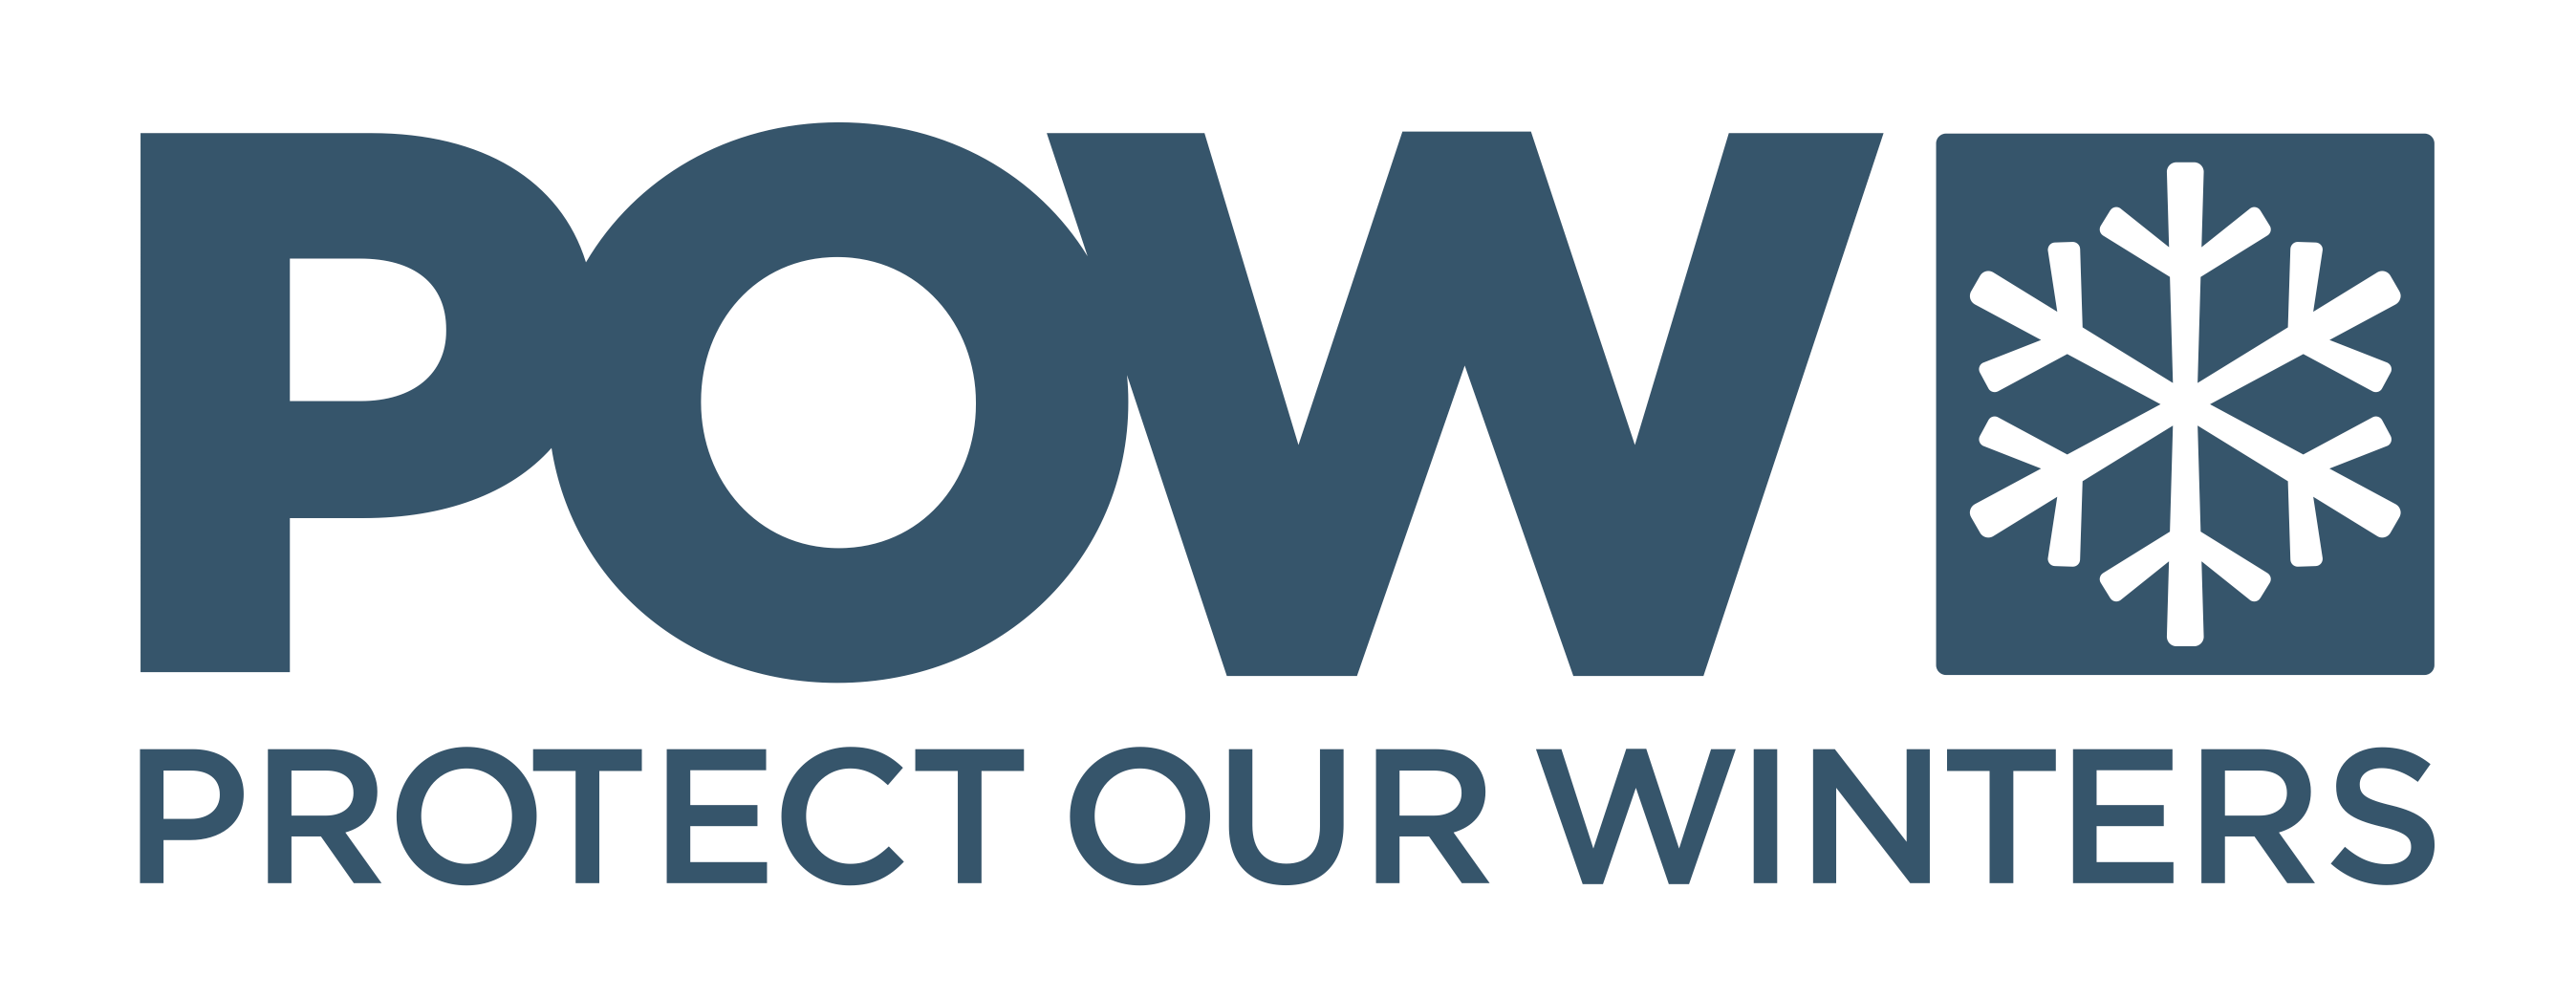 protect our winters logo 